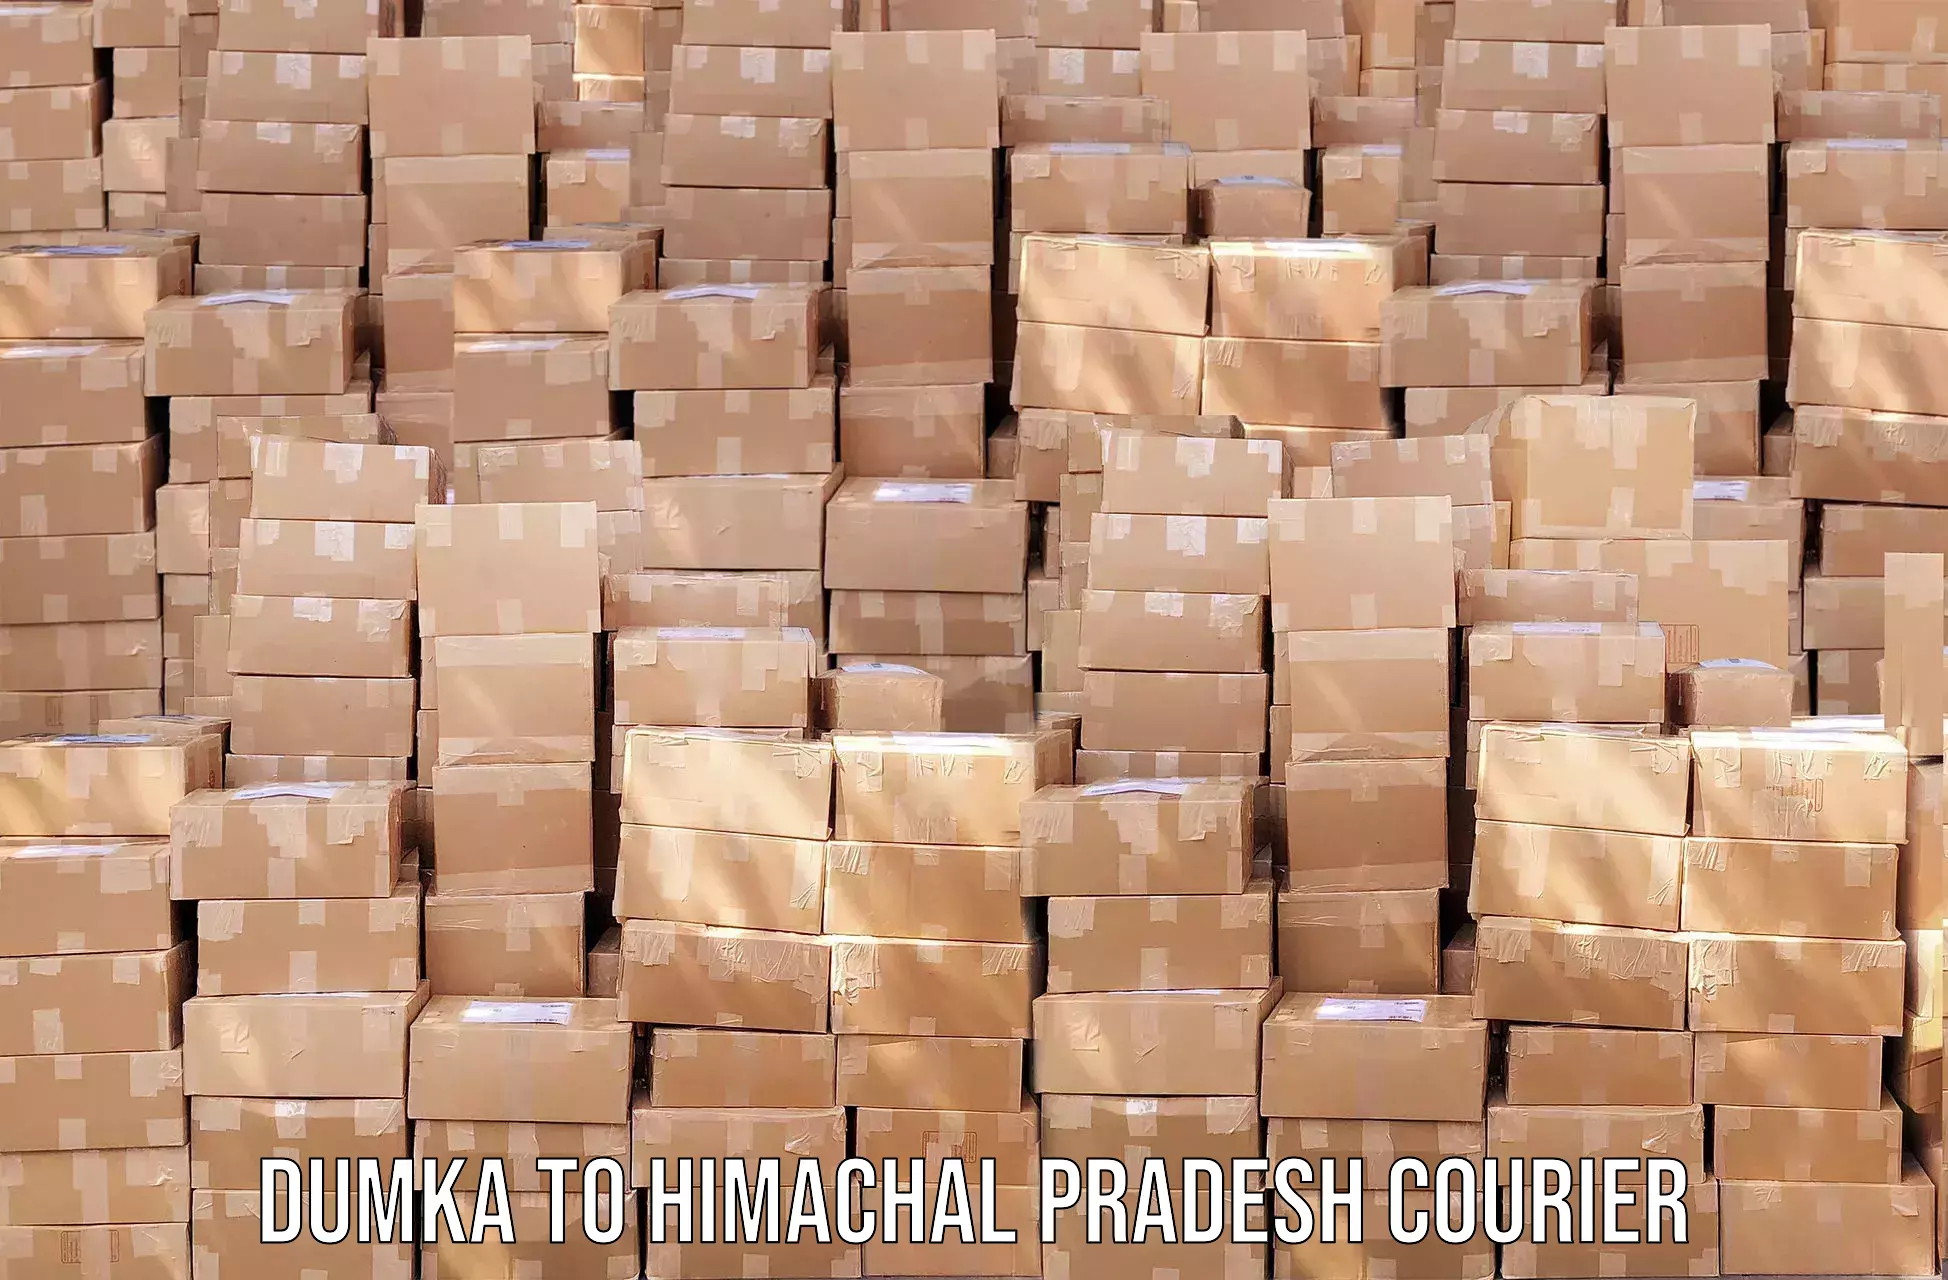 On-call courier service Dumka to Himachal Pradesh